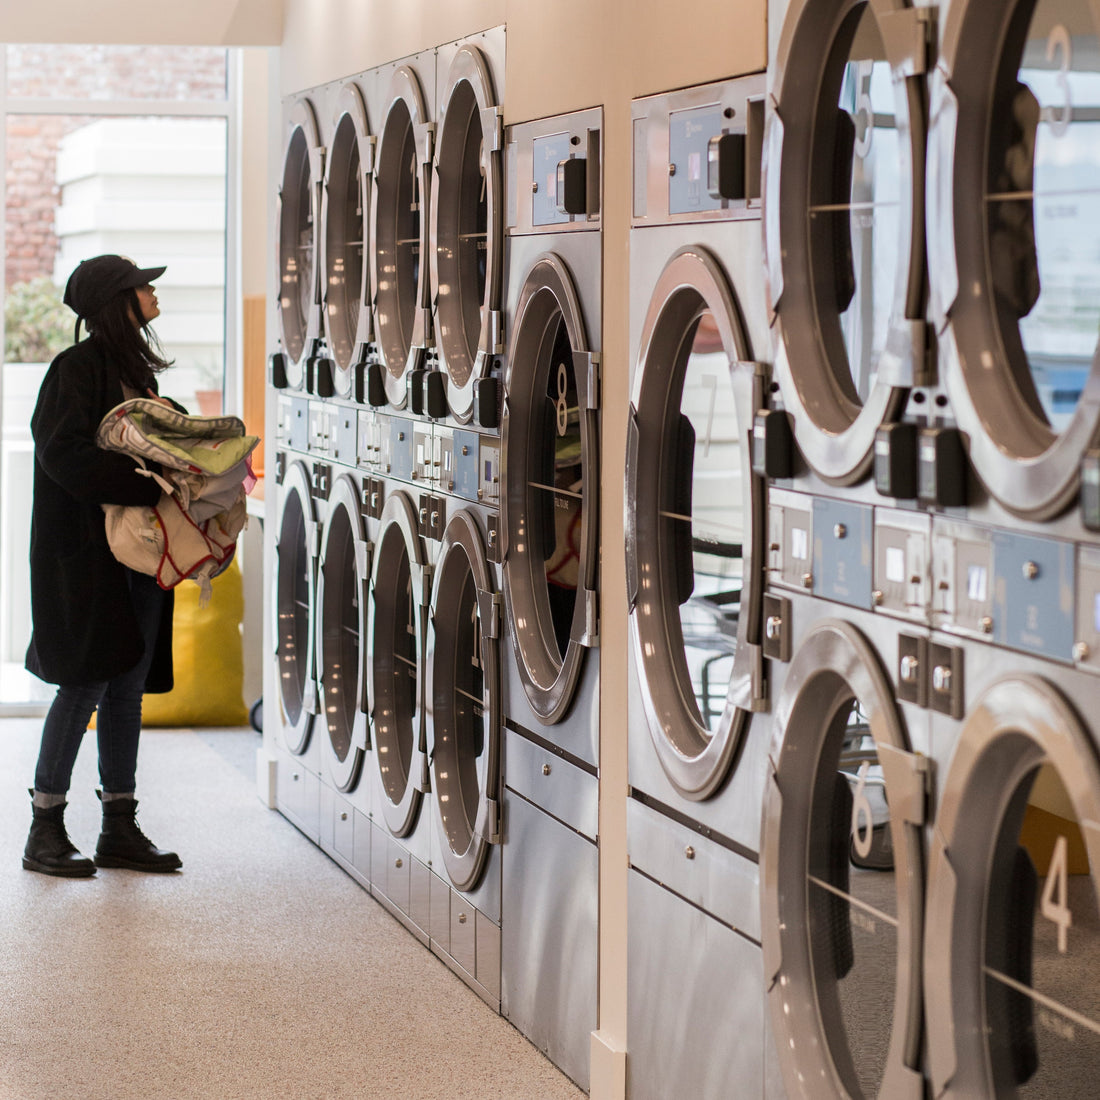 Laundry tips for the college-bound